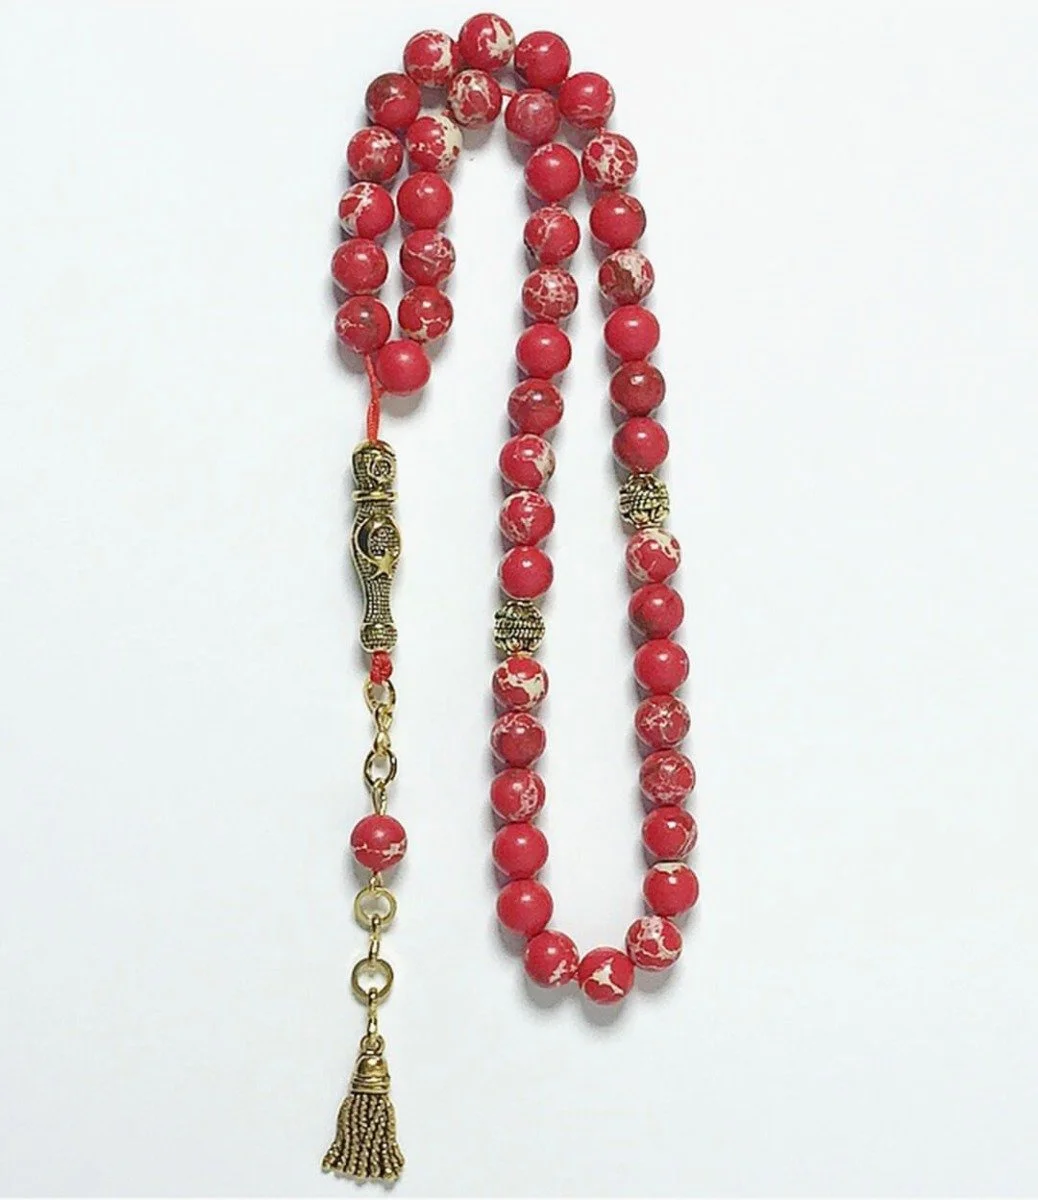 Men's/Women's Rosary from Red Earth Stone Size 7mm